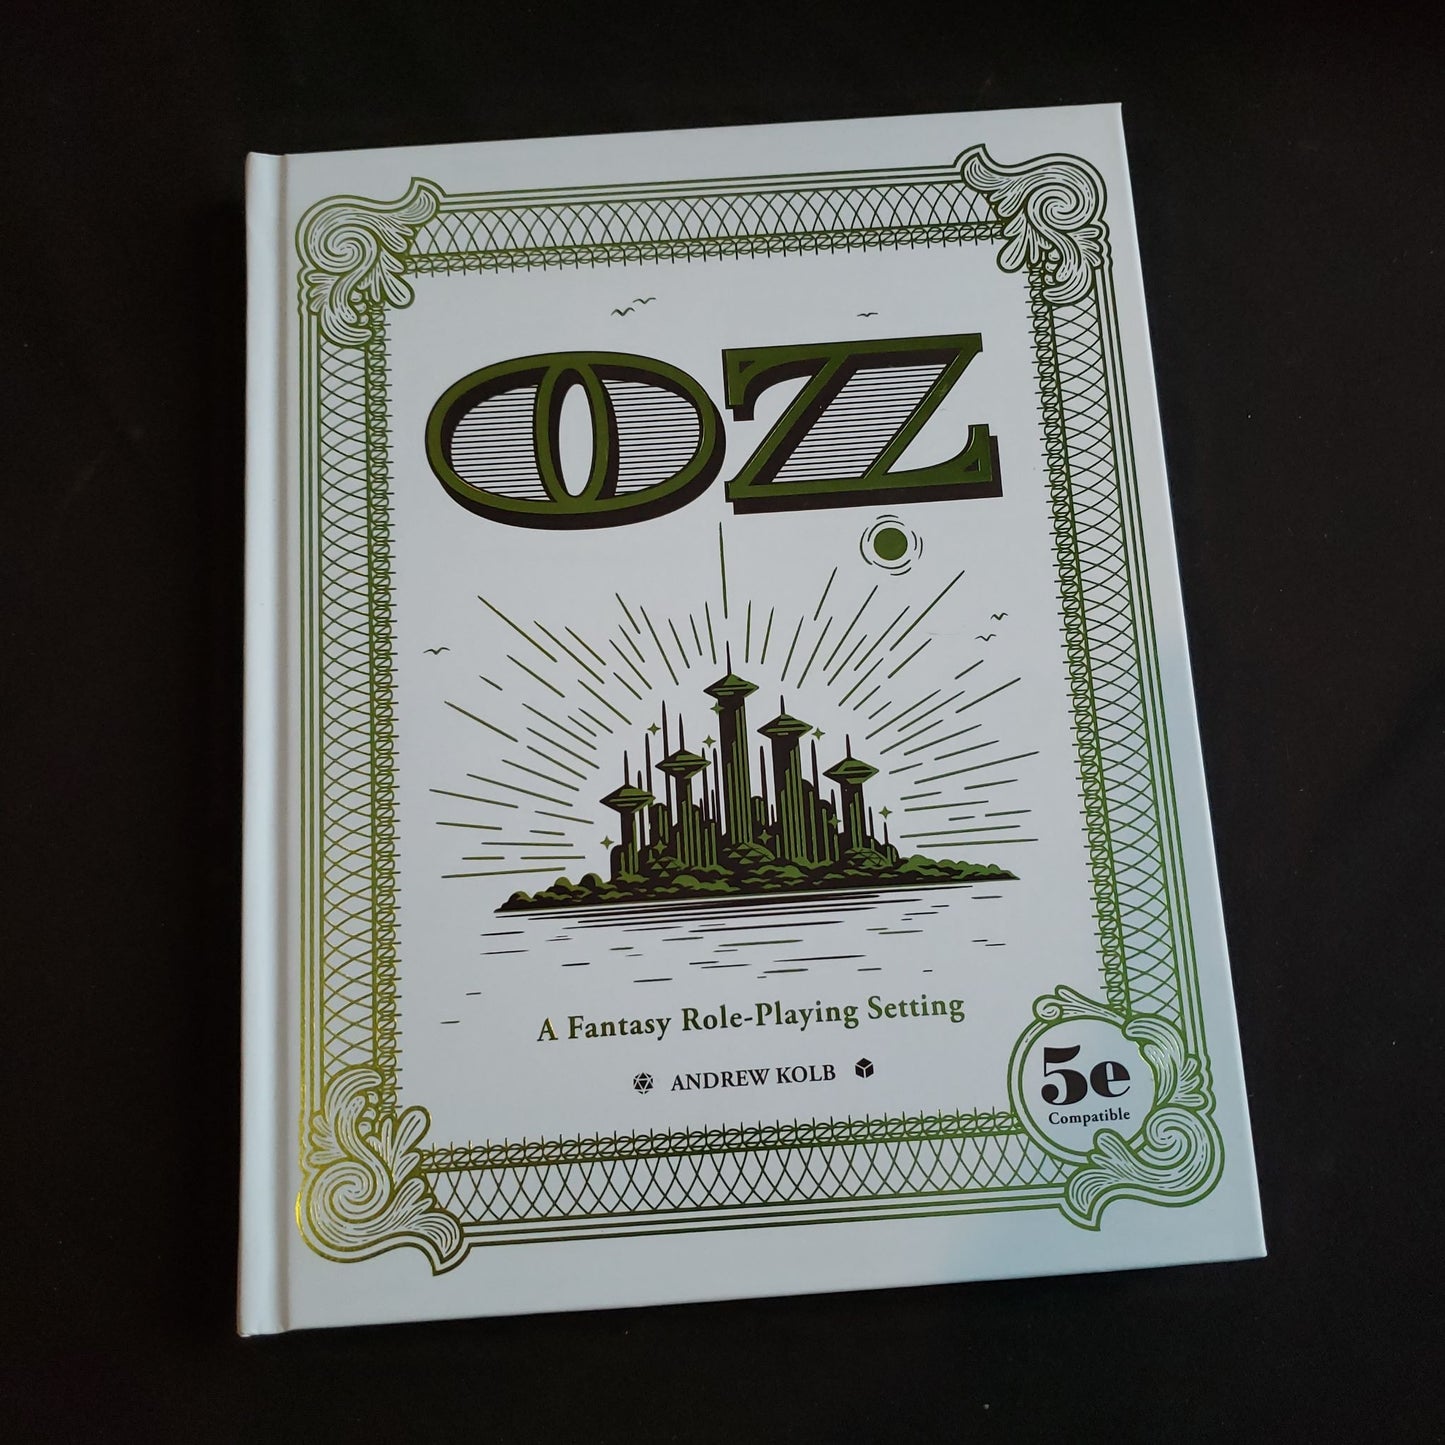 Image shows the front cover of the OZ roleplaying game book